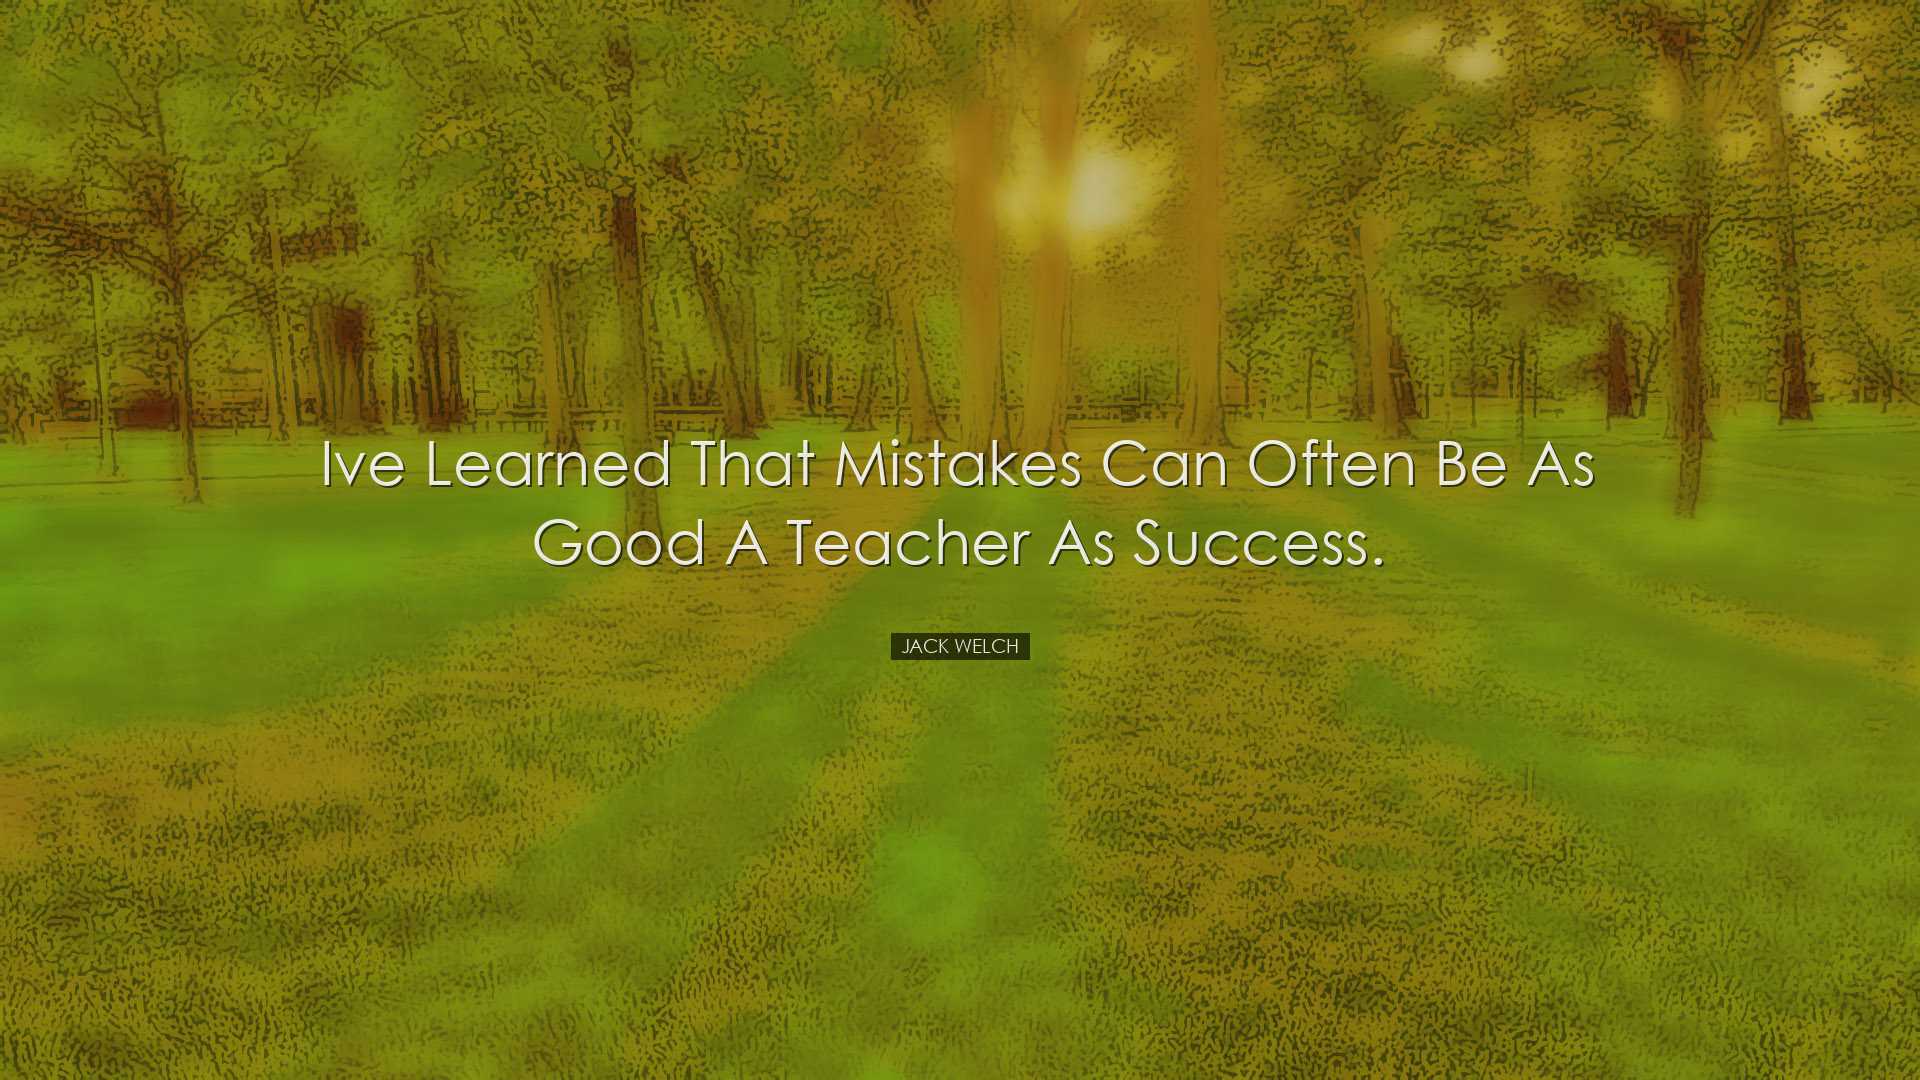 Ive learned that mistakes can often be as good a teacher as succes